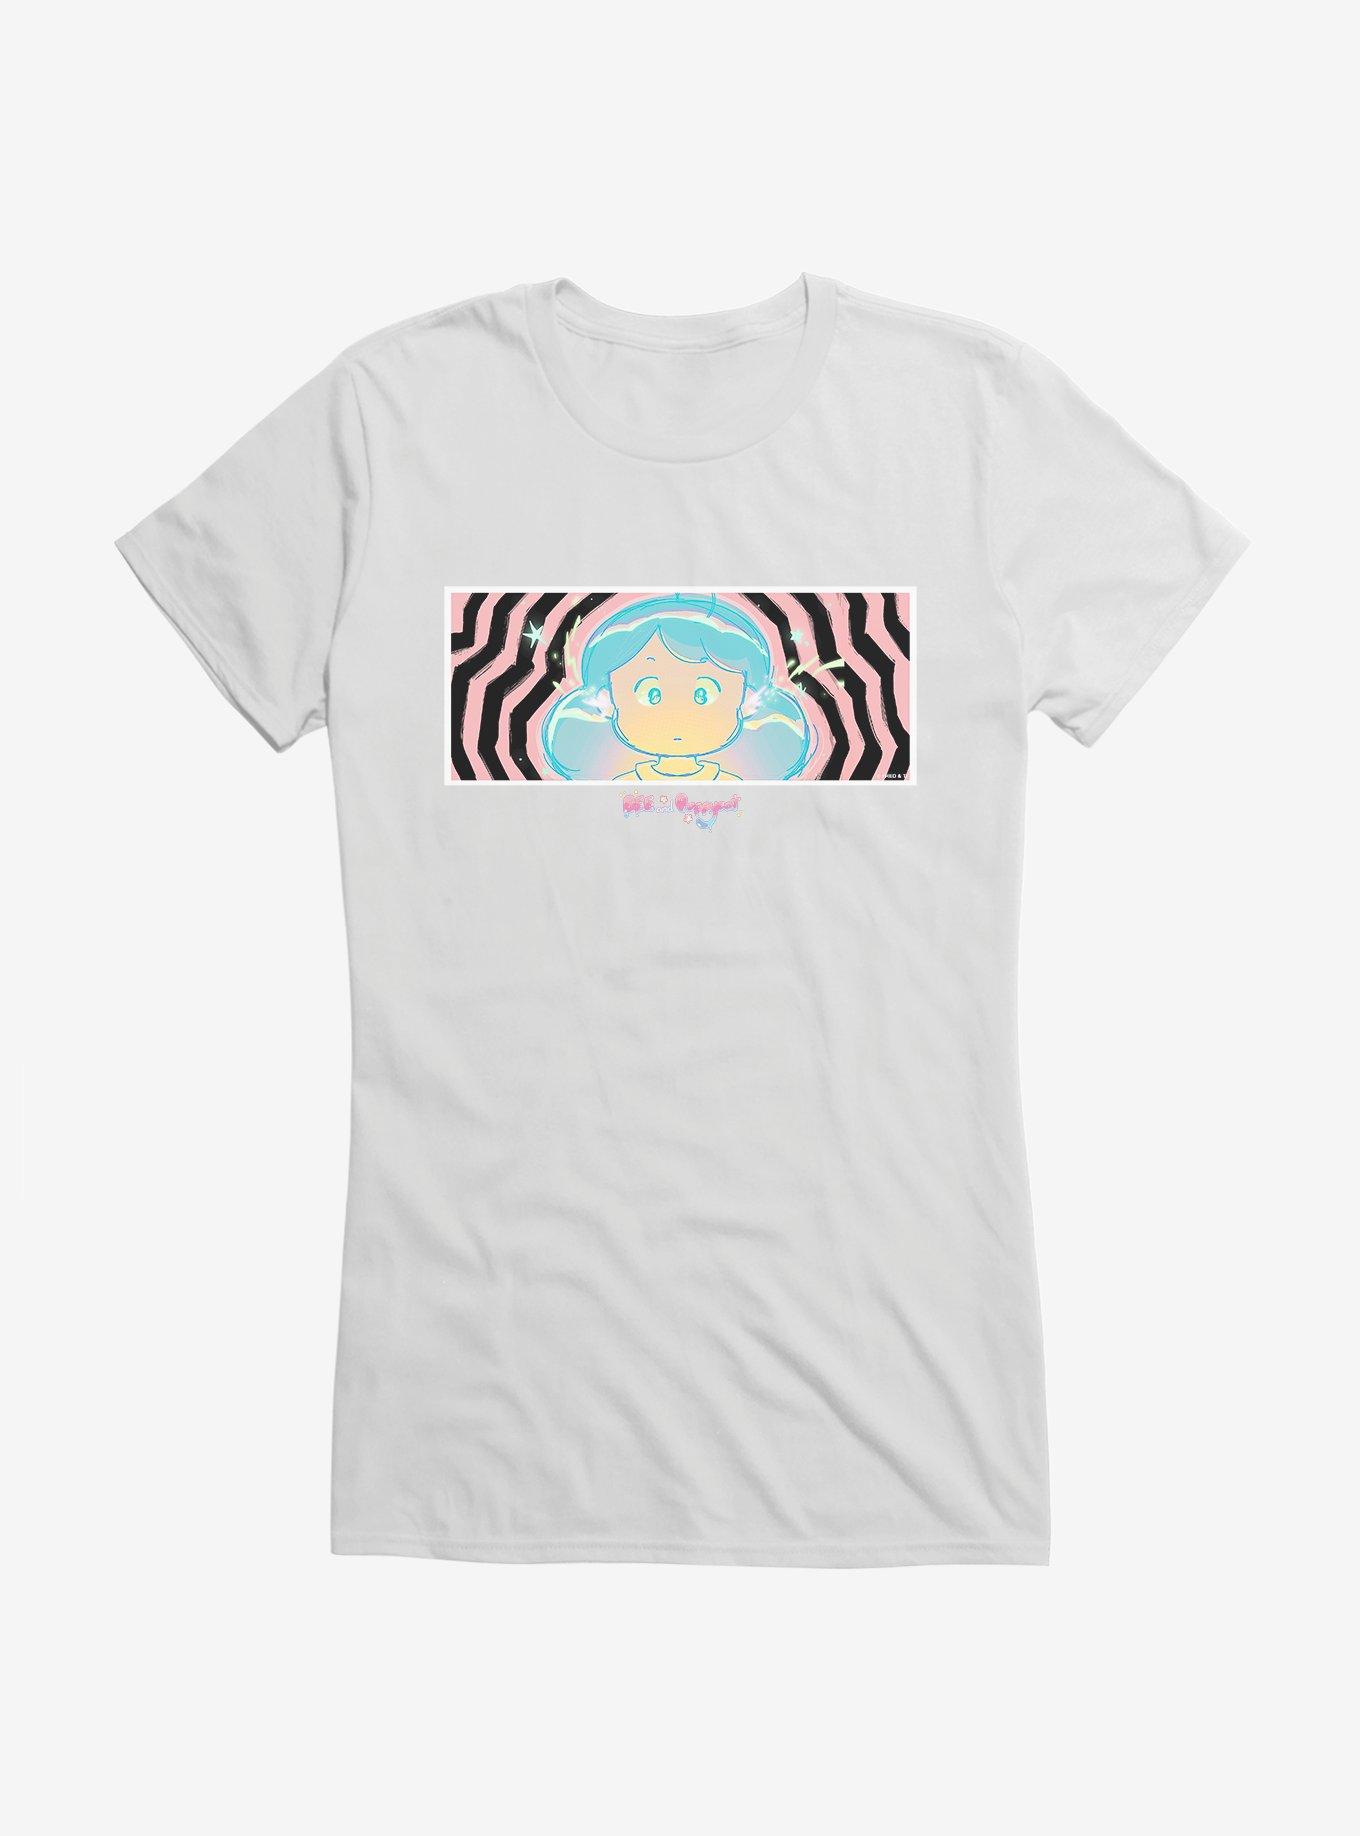 Bee And PuppyCat Dream Premonition Girls T-Shirt, WHITE, hi-res